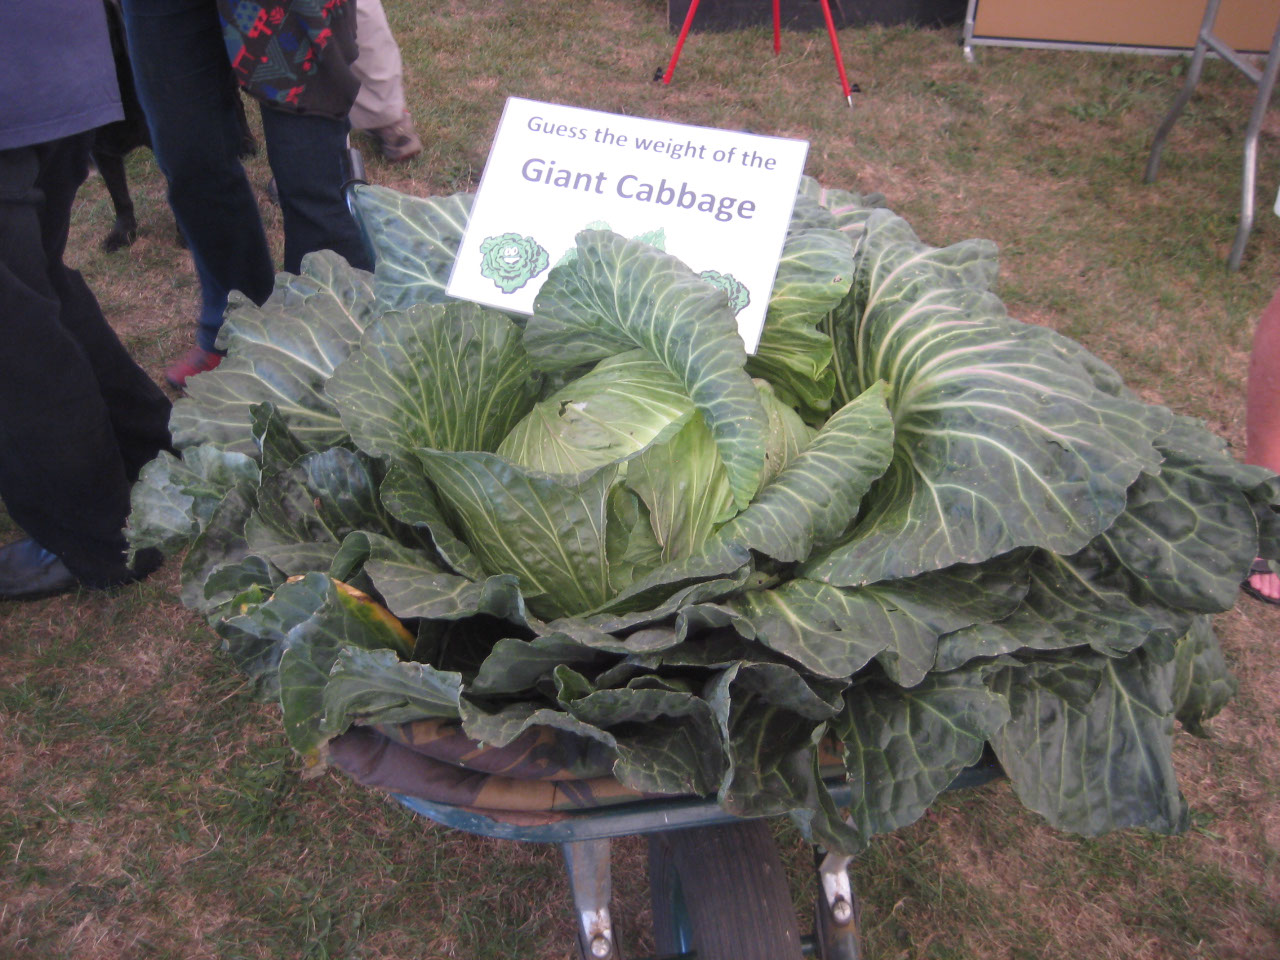 Giant Cabbage in a wheel barrow